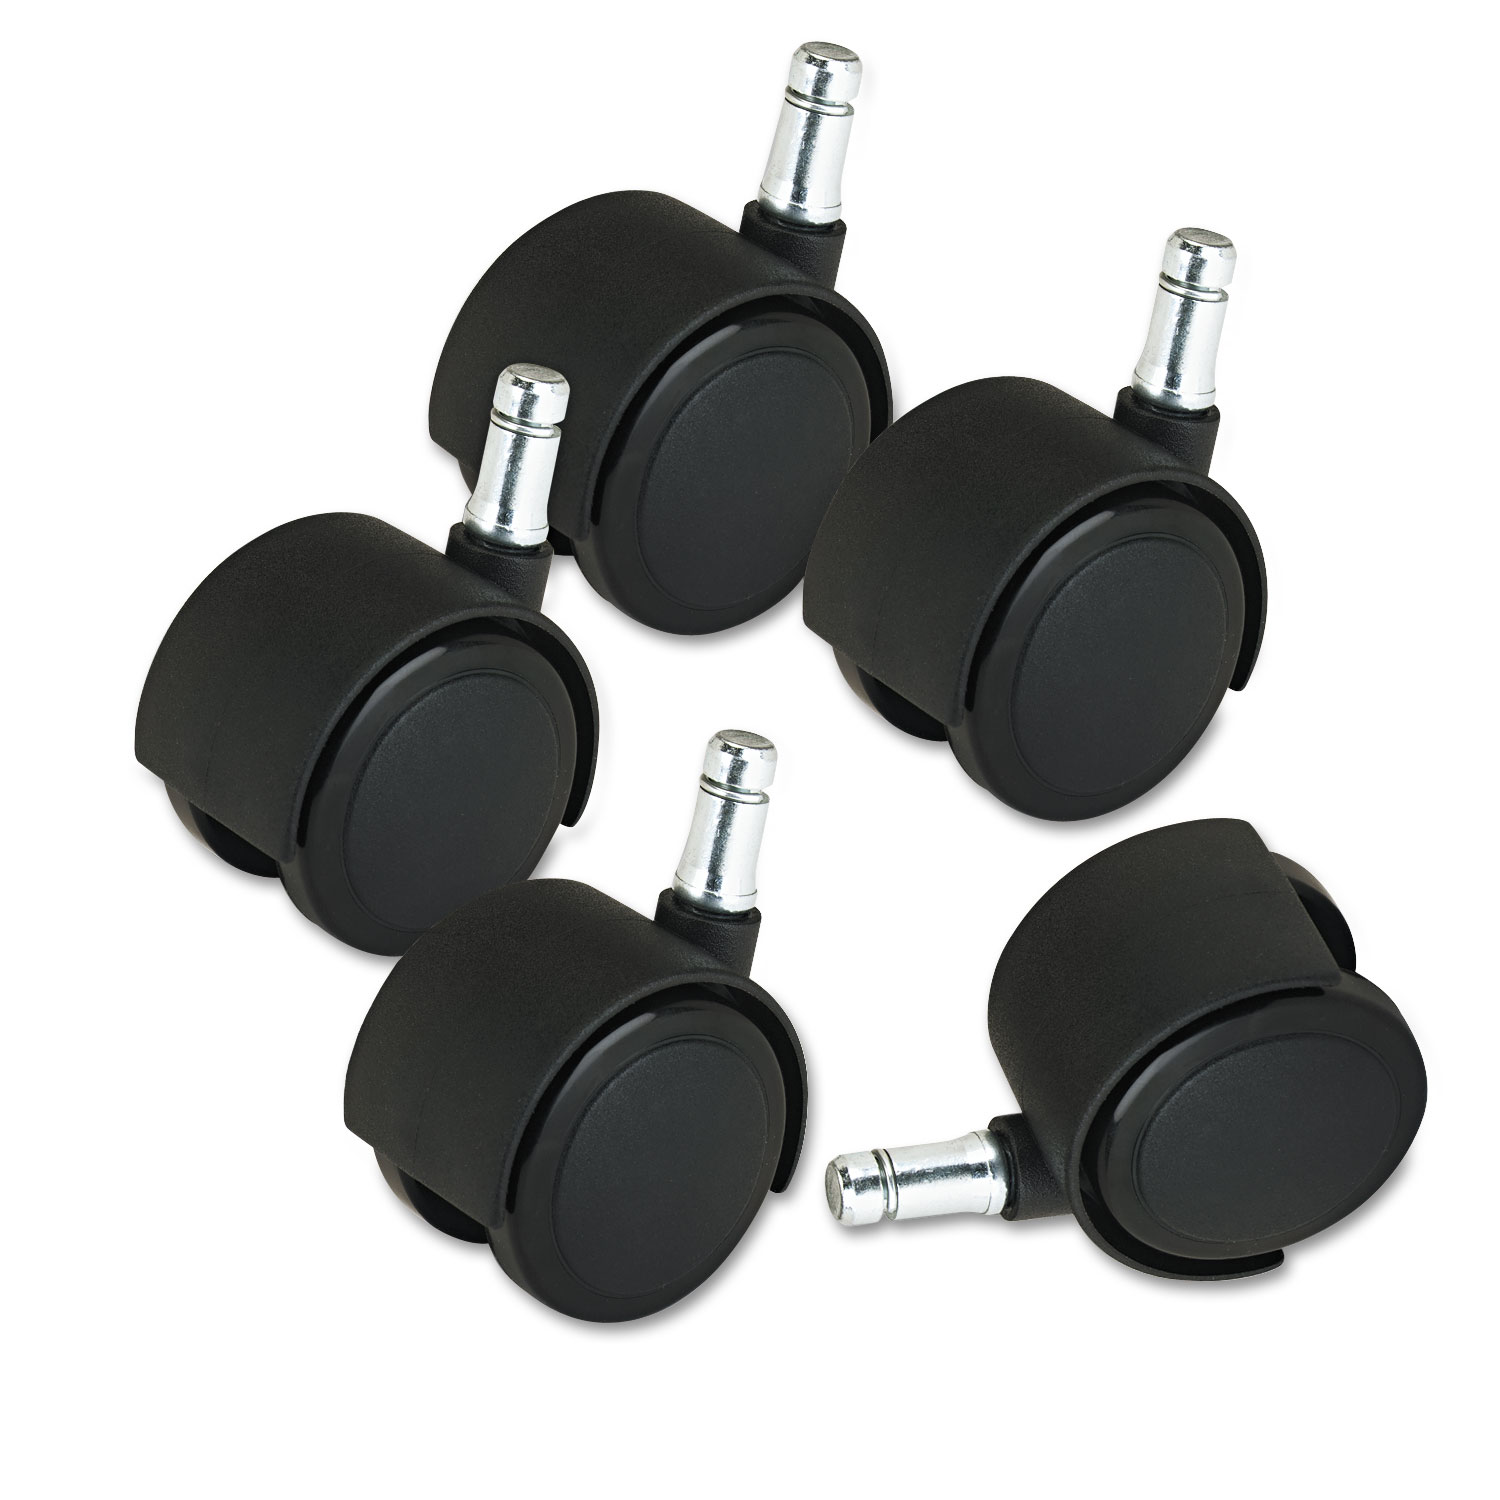 Deluxe Duet Casters, Polyurethane, B and K Stems, 110 lbs./Caster, 5/Set